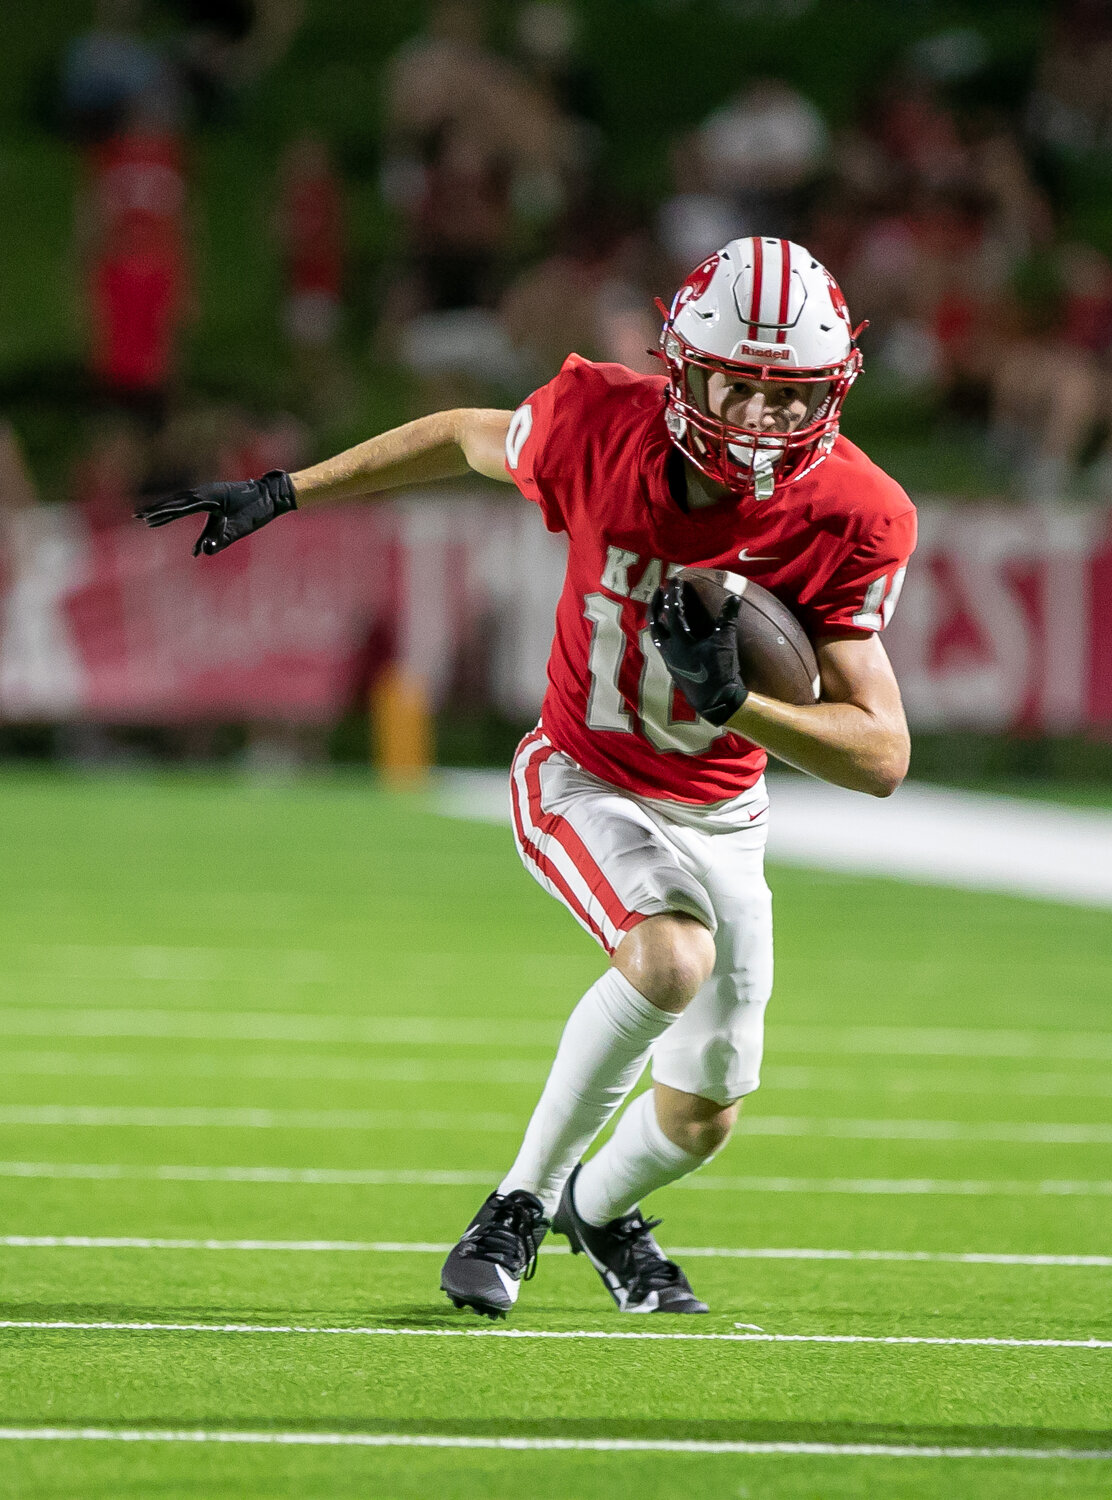 Oliver Ginn runs downfield after making a catch during Friday's game between Katy and Tompkins at Rhodes Stadium.